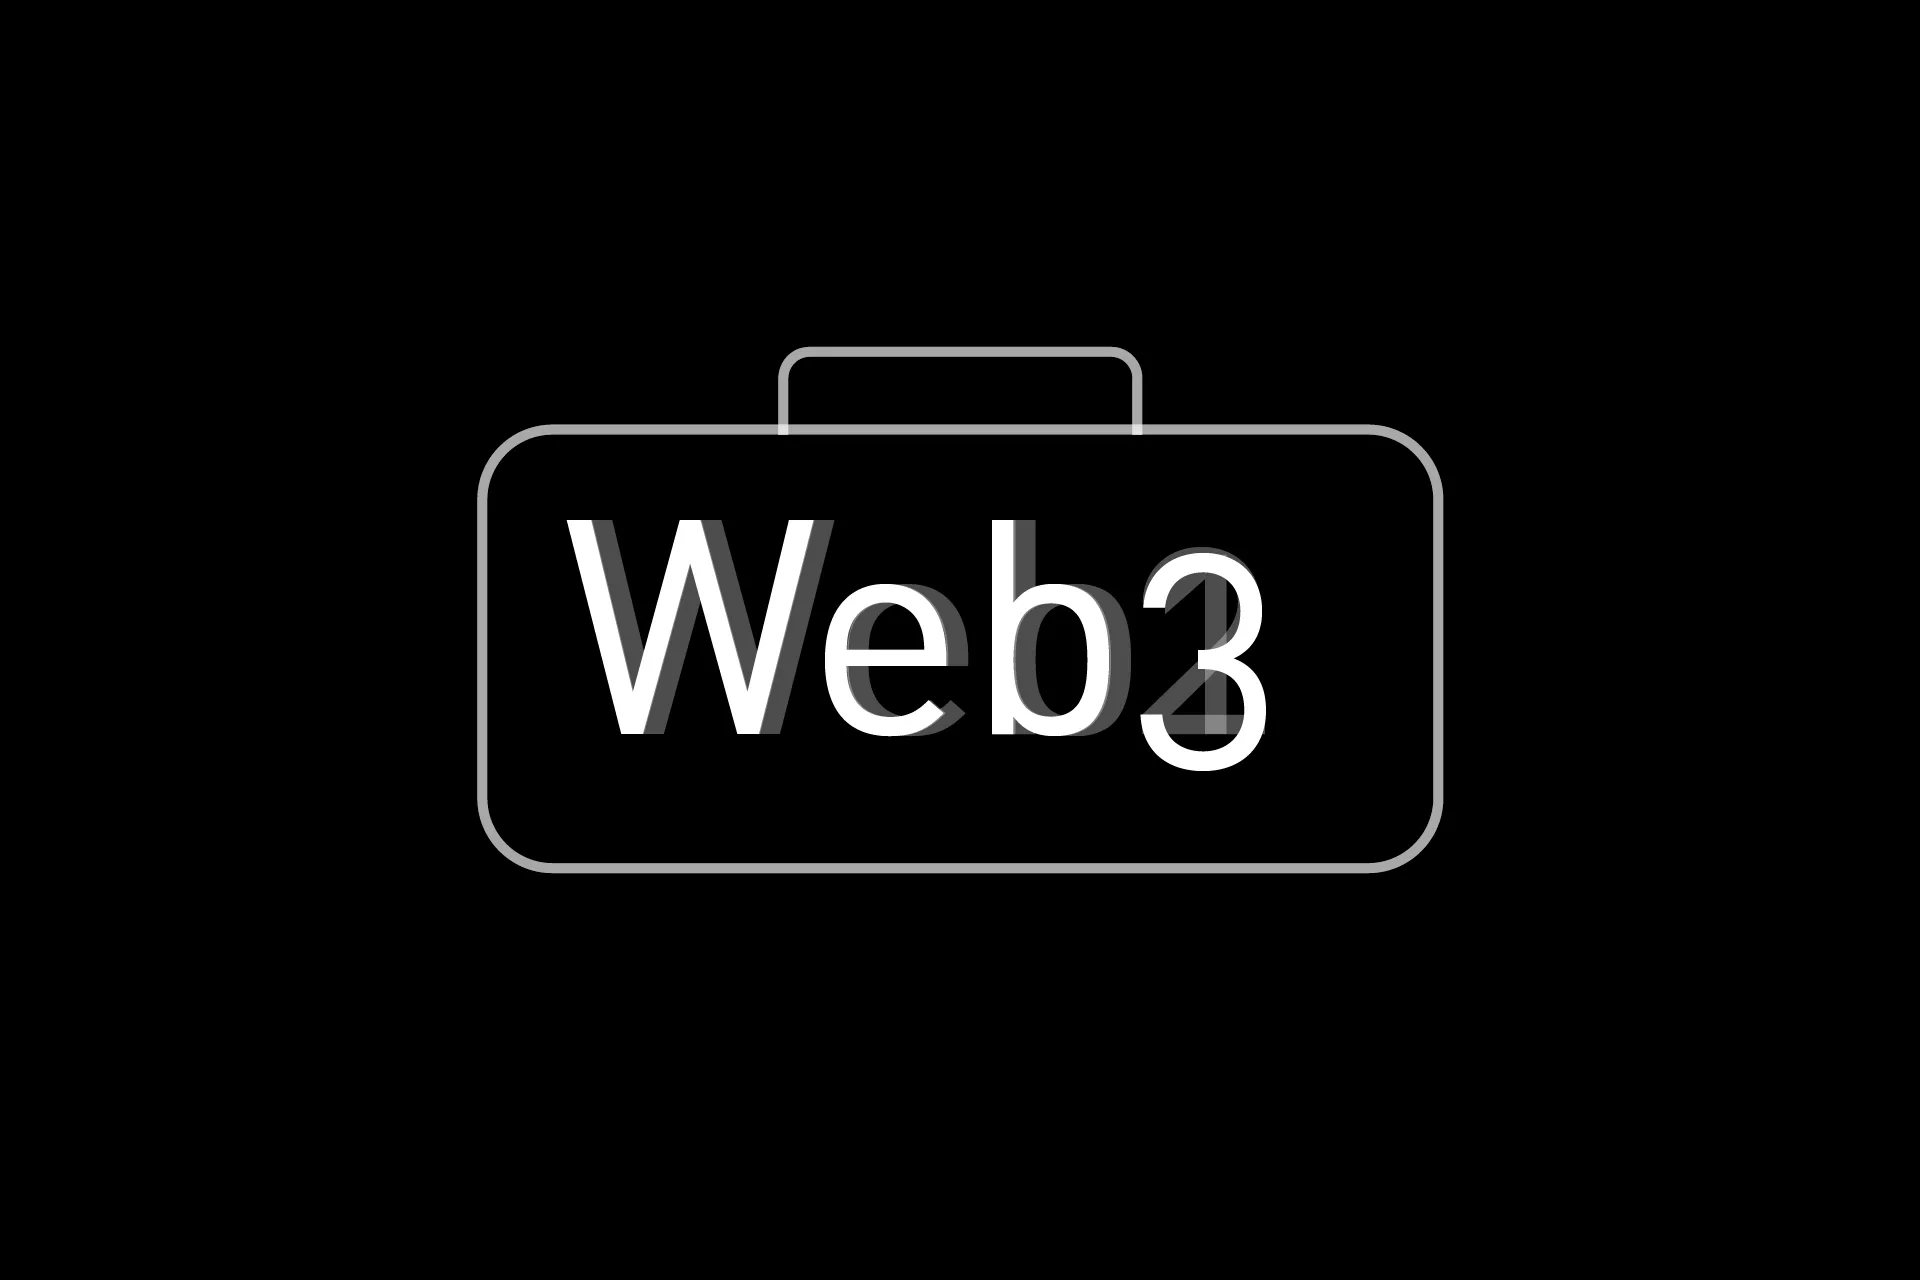 Web3 Toolkits are offer quick, accessible frameworks to build technologies that include Decentralized Finance, Decentralized Governance, Self-Sovereign Identity & the NFT asset class.